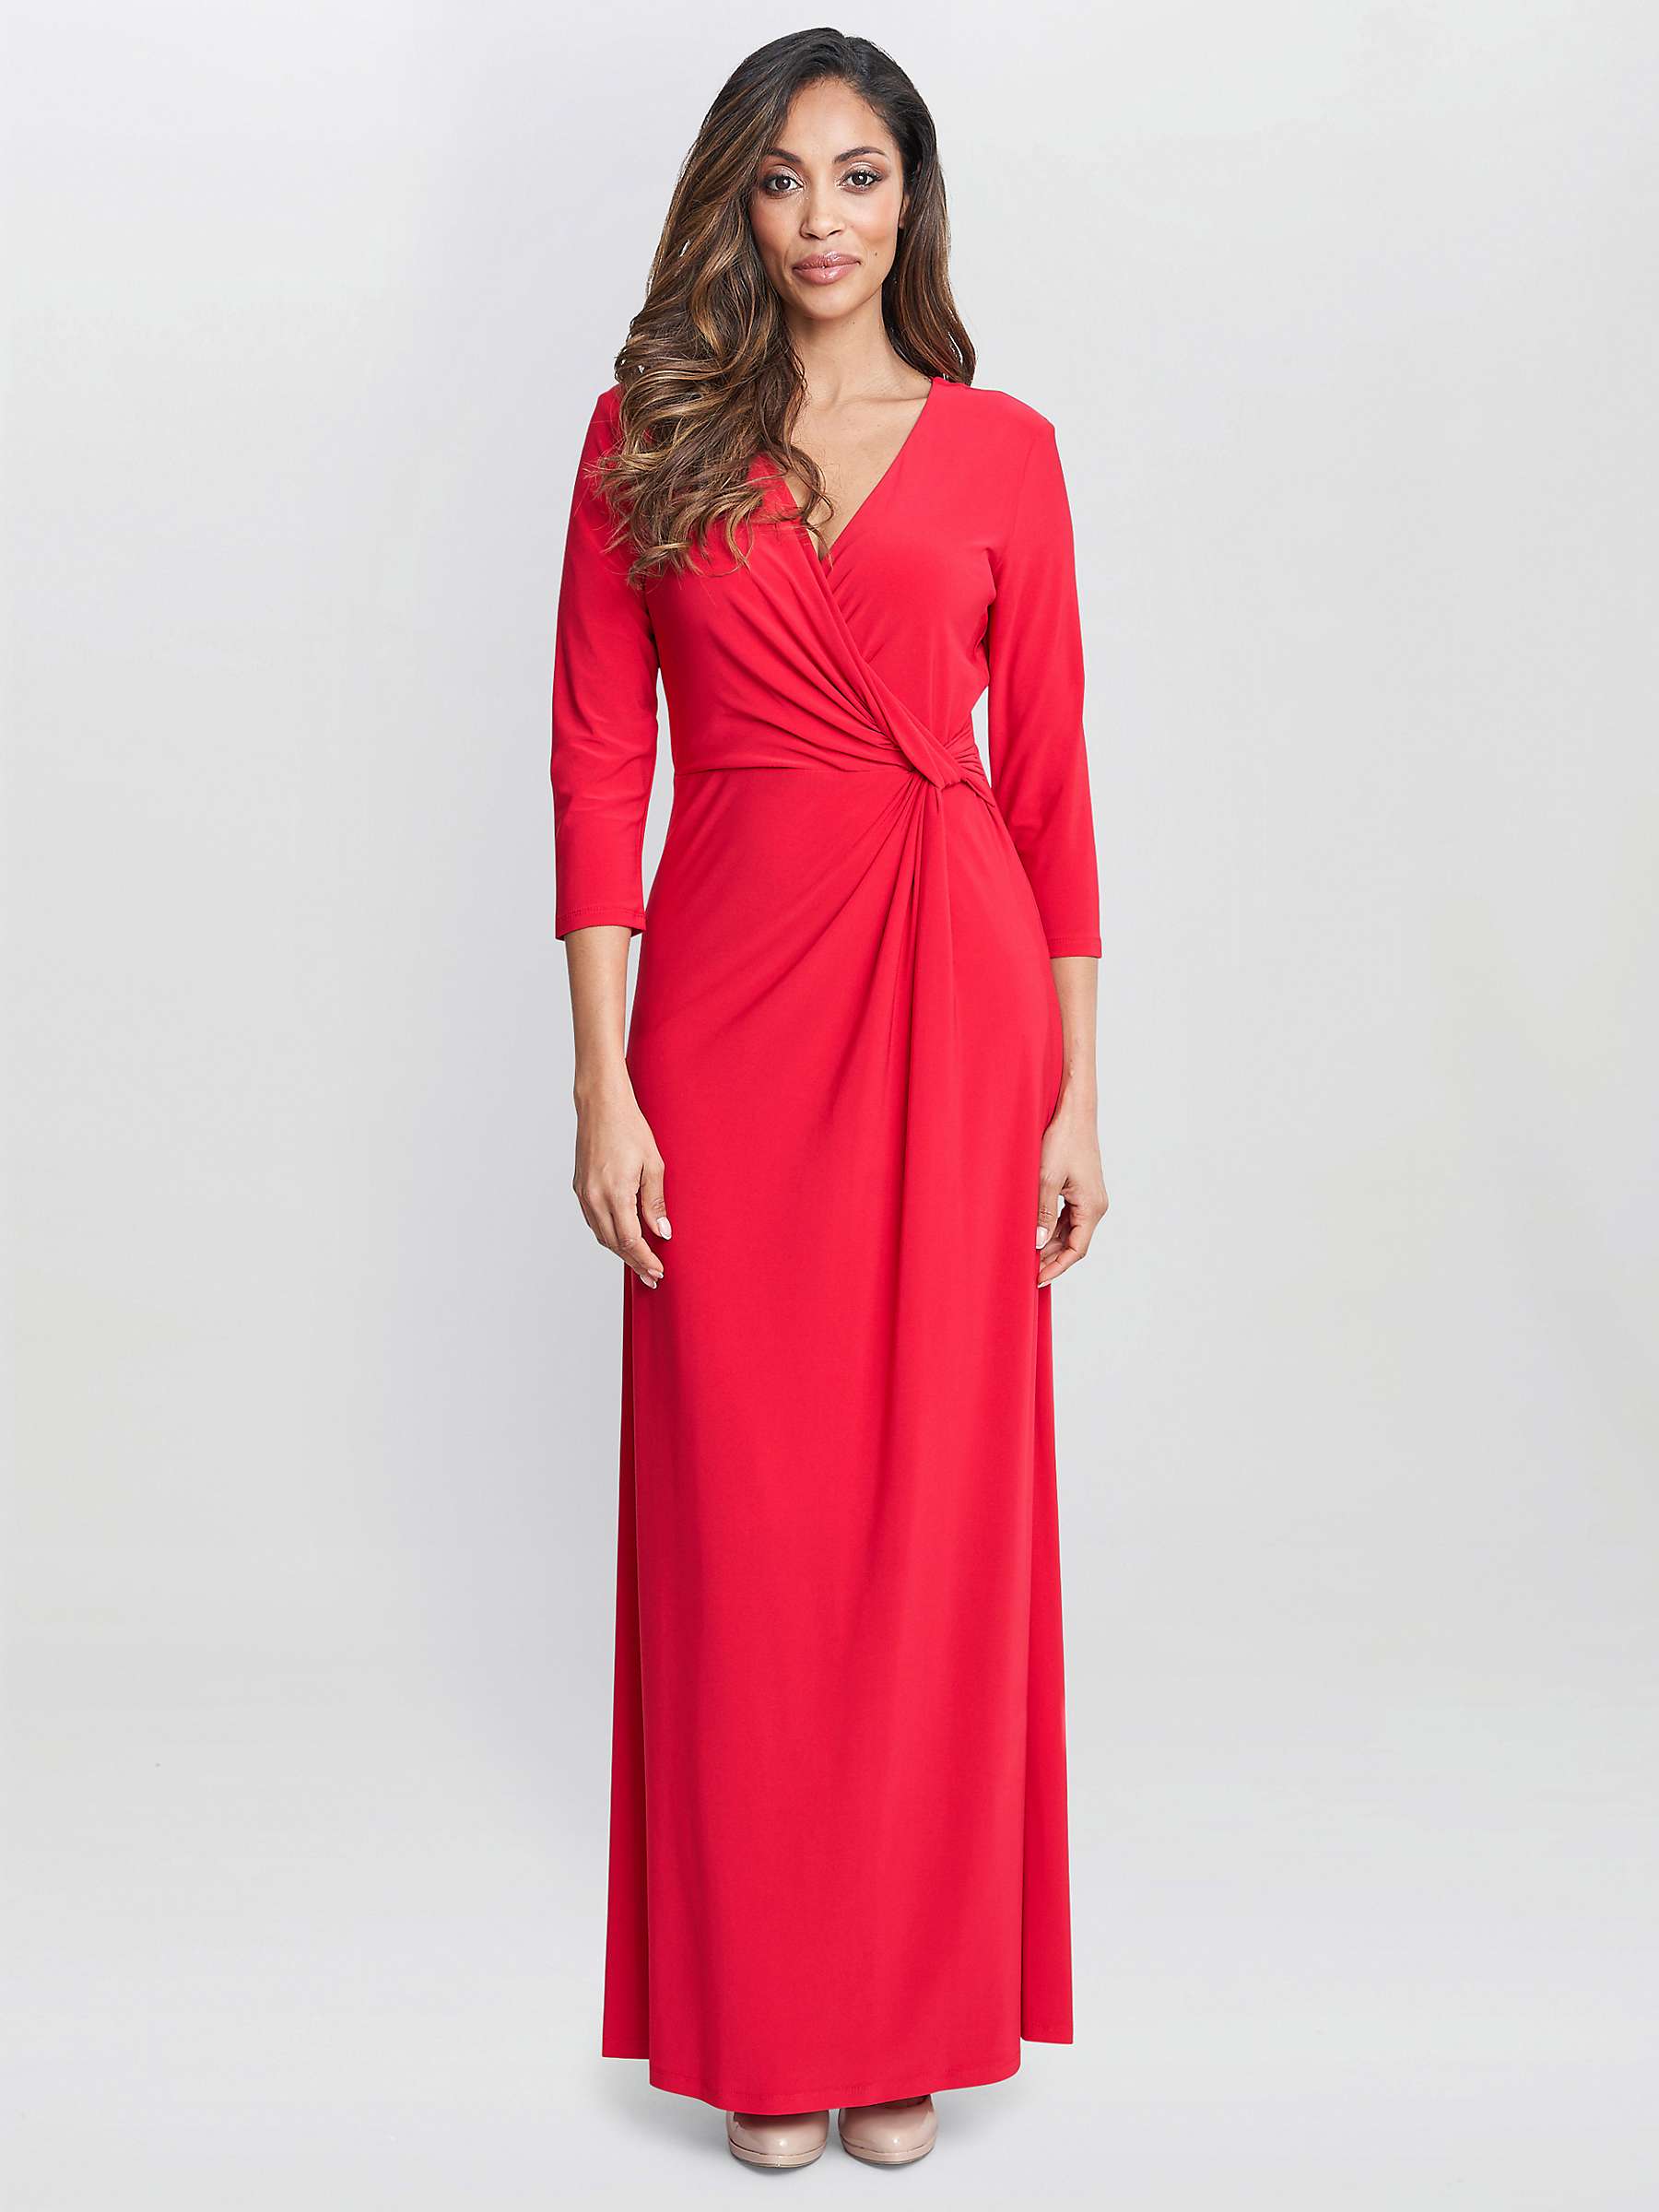 Buy Gina Bacconi Celine Jersey Wrap Maxi Dress, Red Online at johnlewis.com